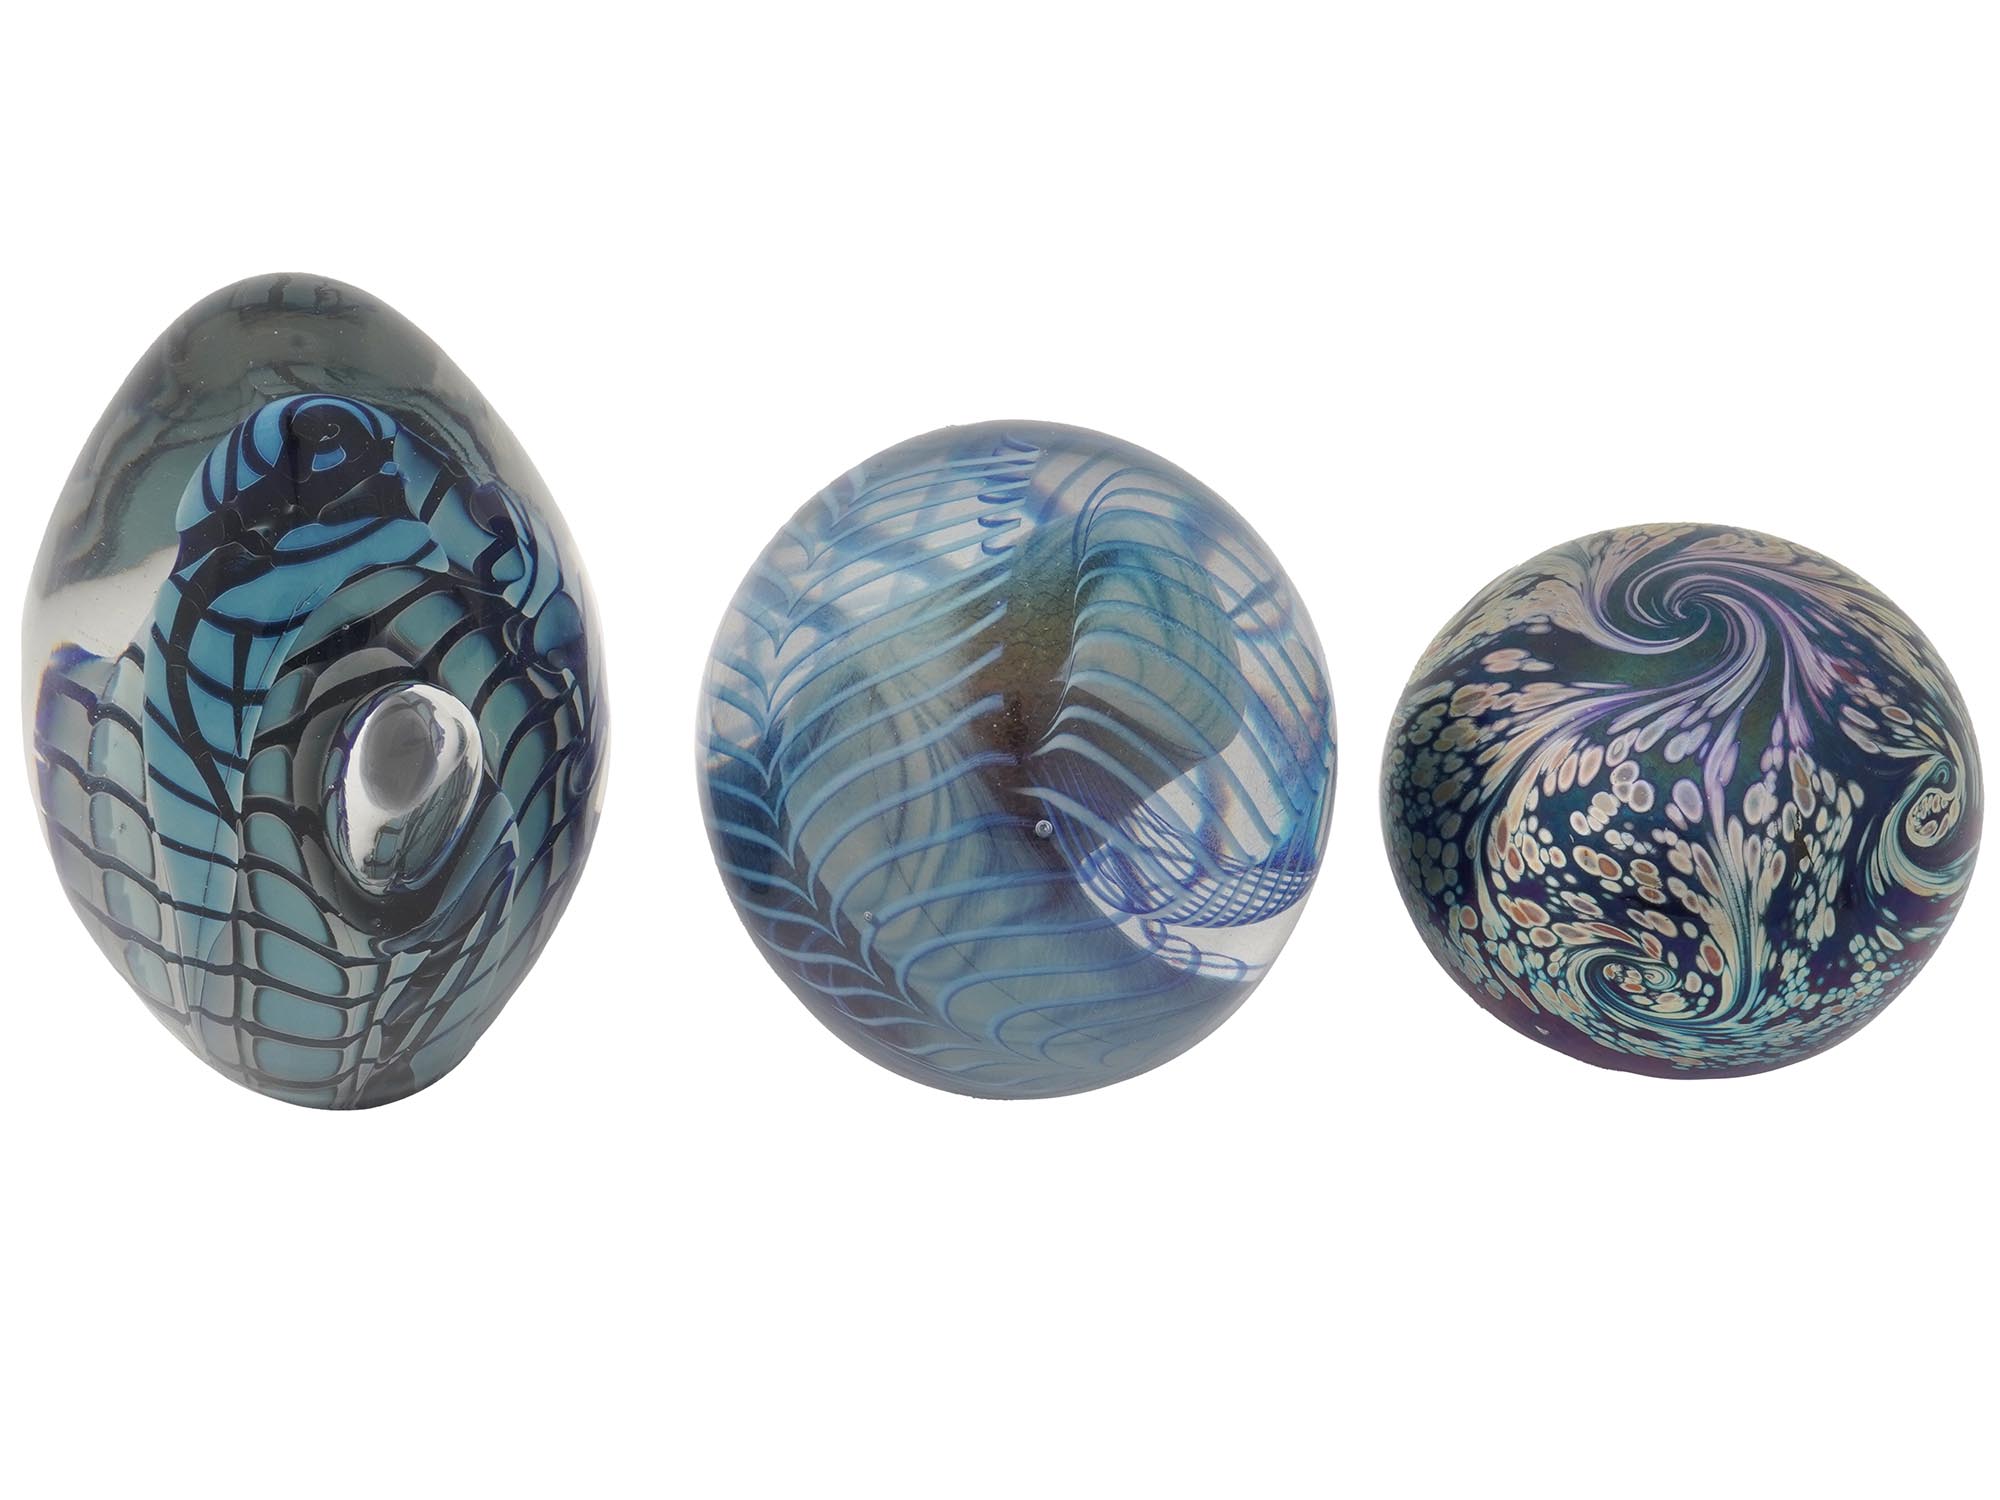 GROUP OF NINE HAND MADE ART GLASS PAPER WEIGHTS PIC-3